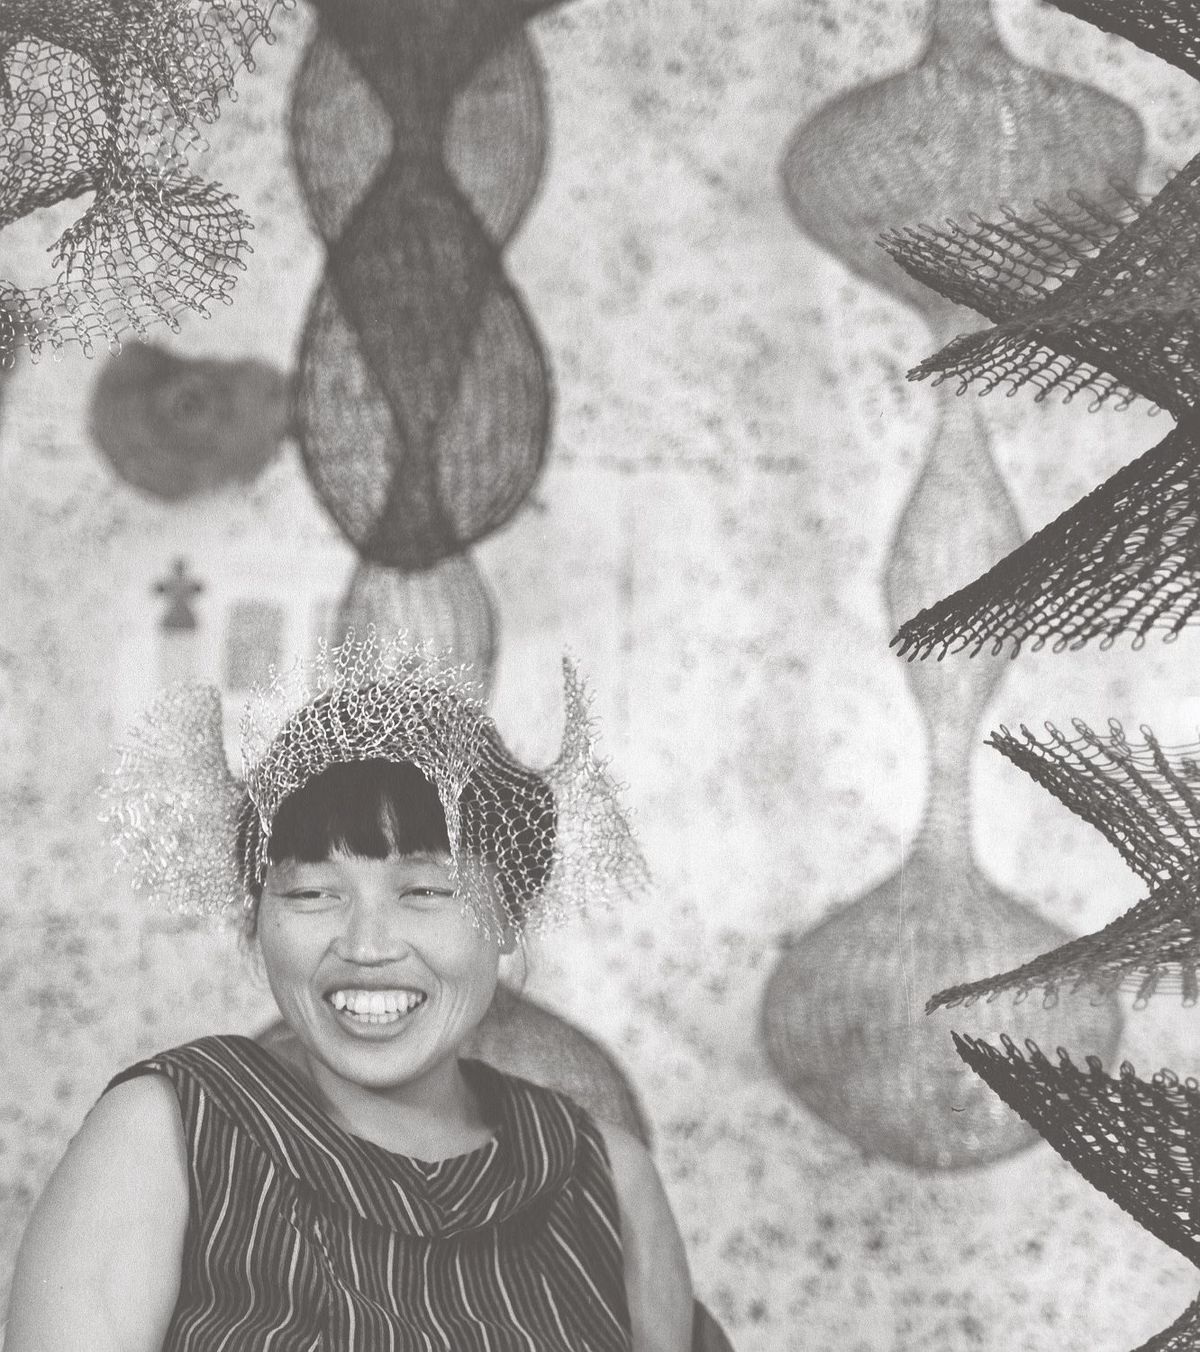 Ruth Asawa et des Hanging Sculptures, vers 1958, photographie de Paul Hassel. Photo : Paul Hassel, Courtesy The Estate of Ruth Asawa and David Zwirner.